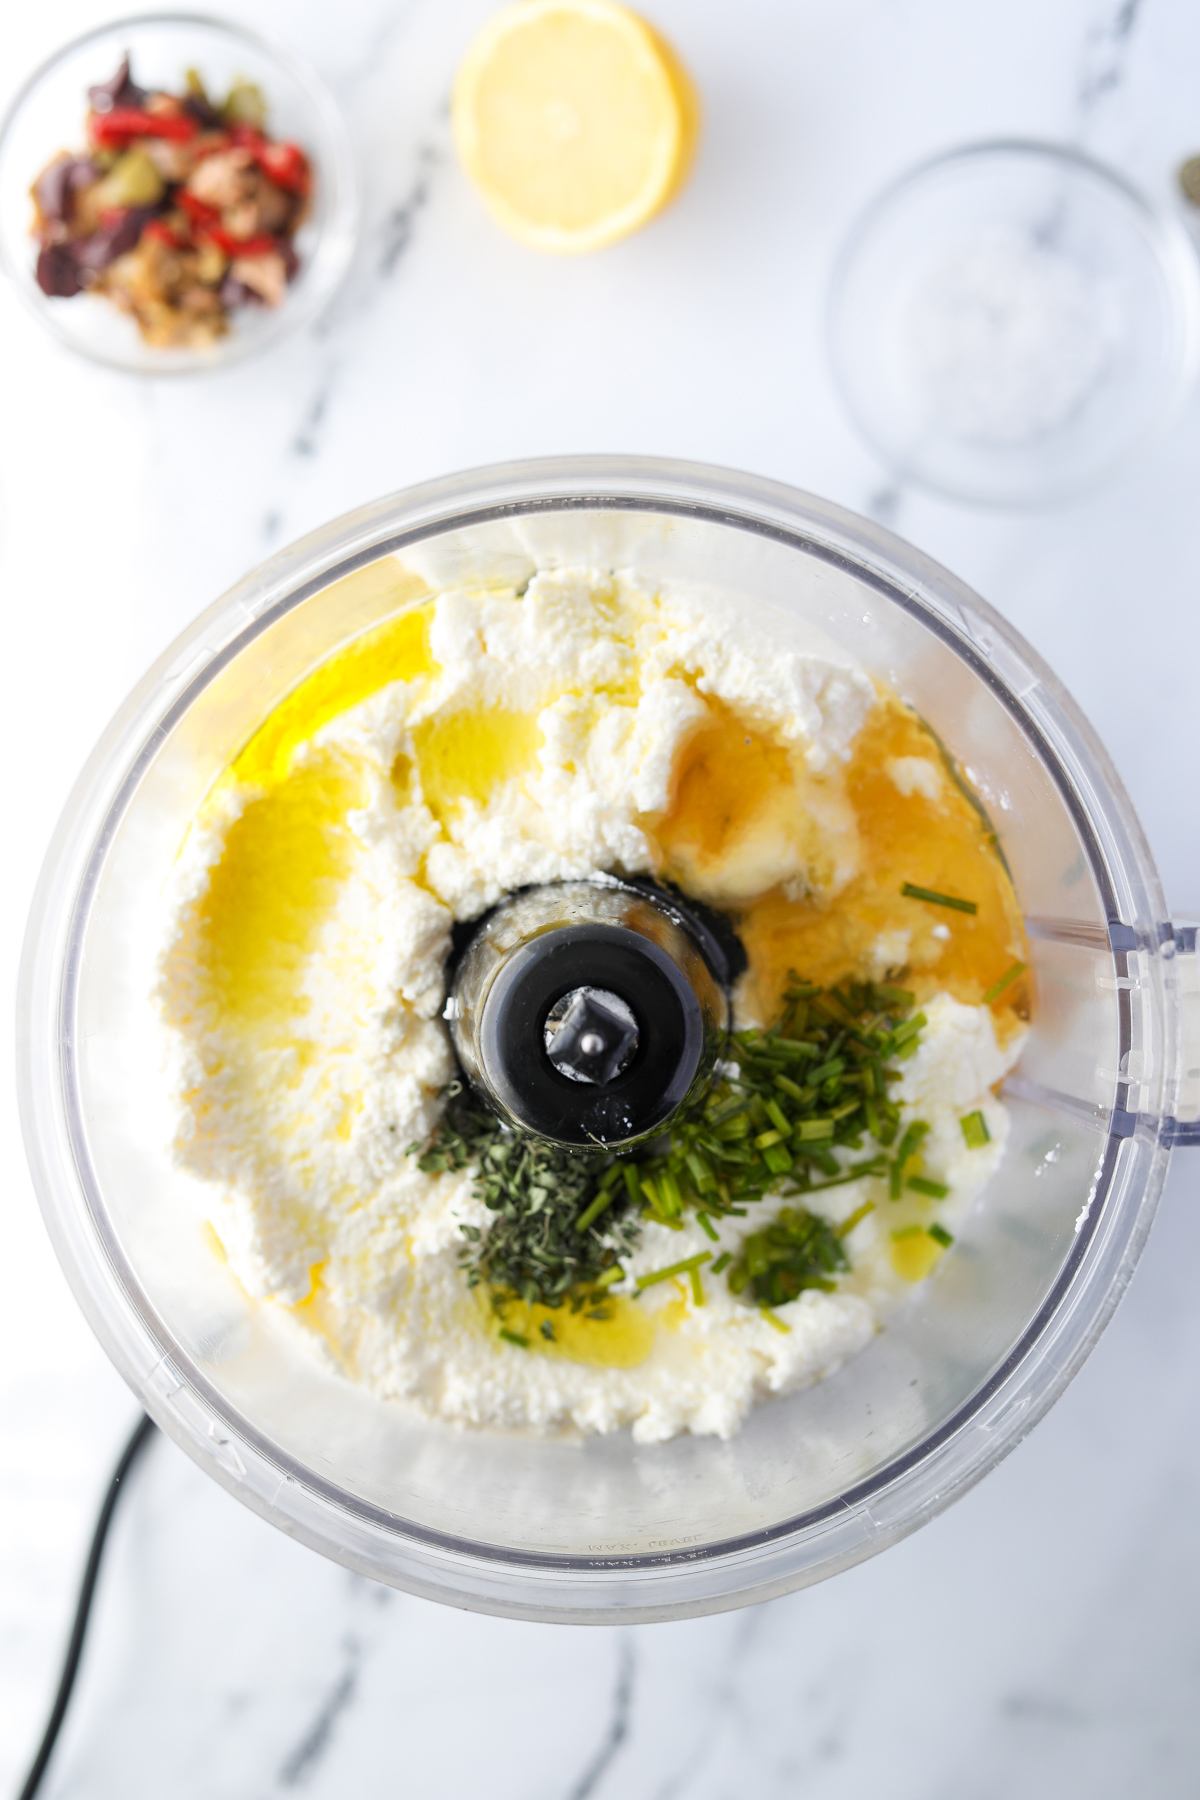 A food processor filled with ricotta, lemon, honey, herbs, and olive oil.